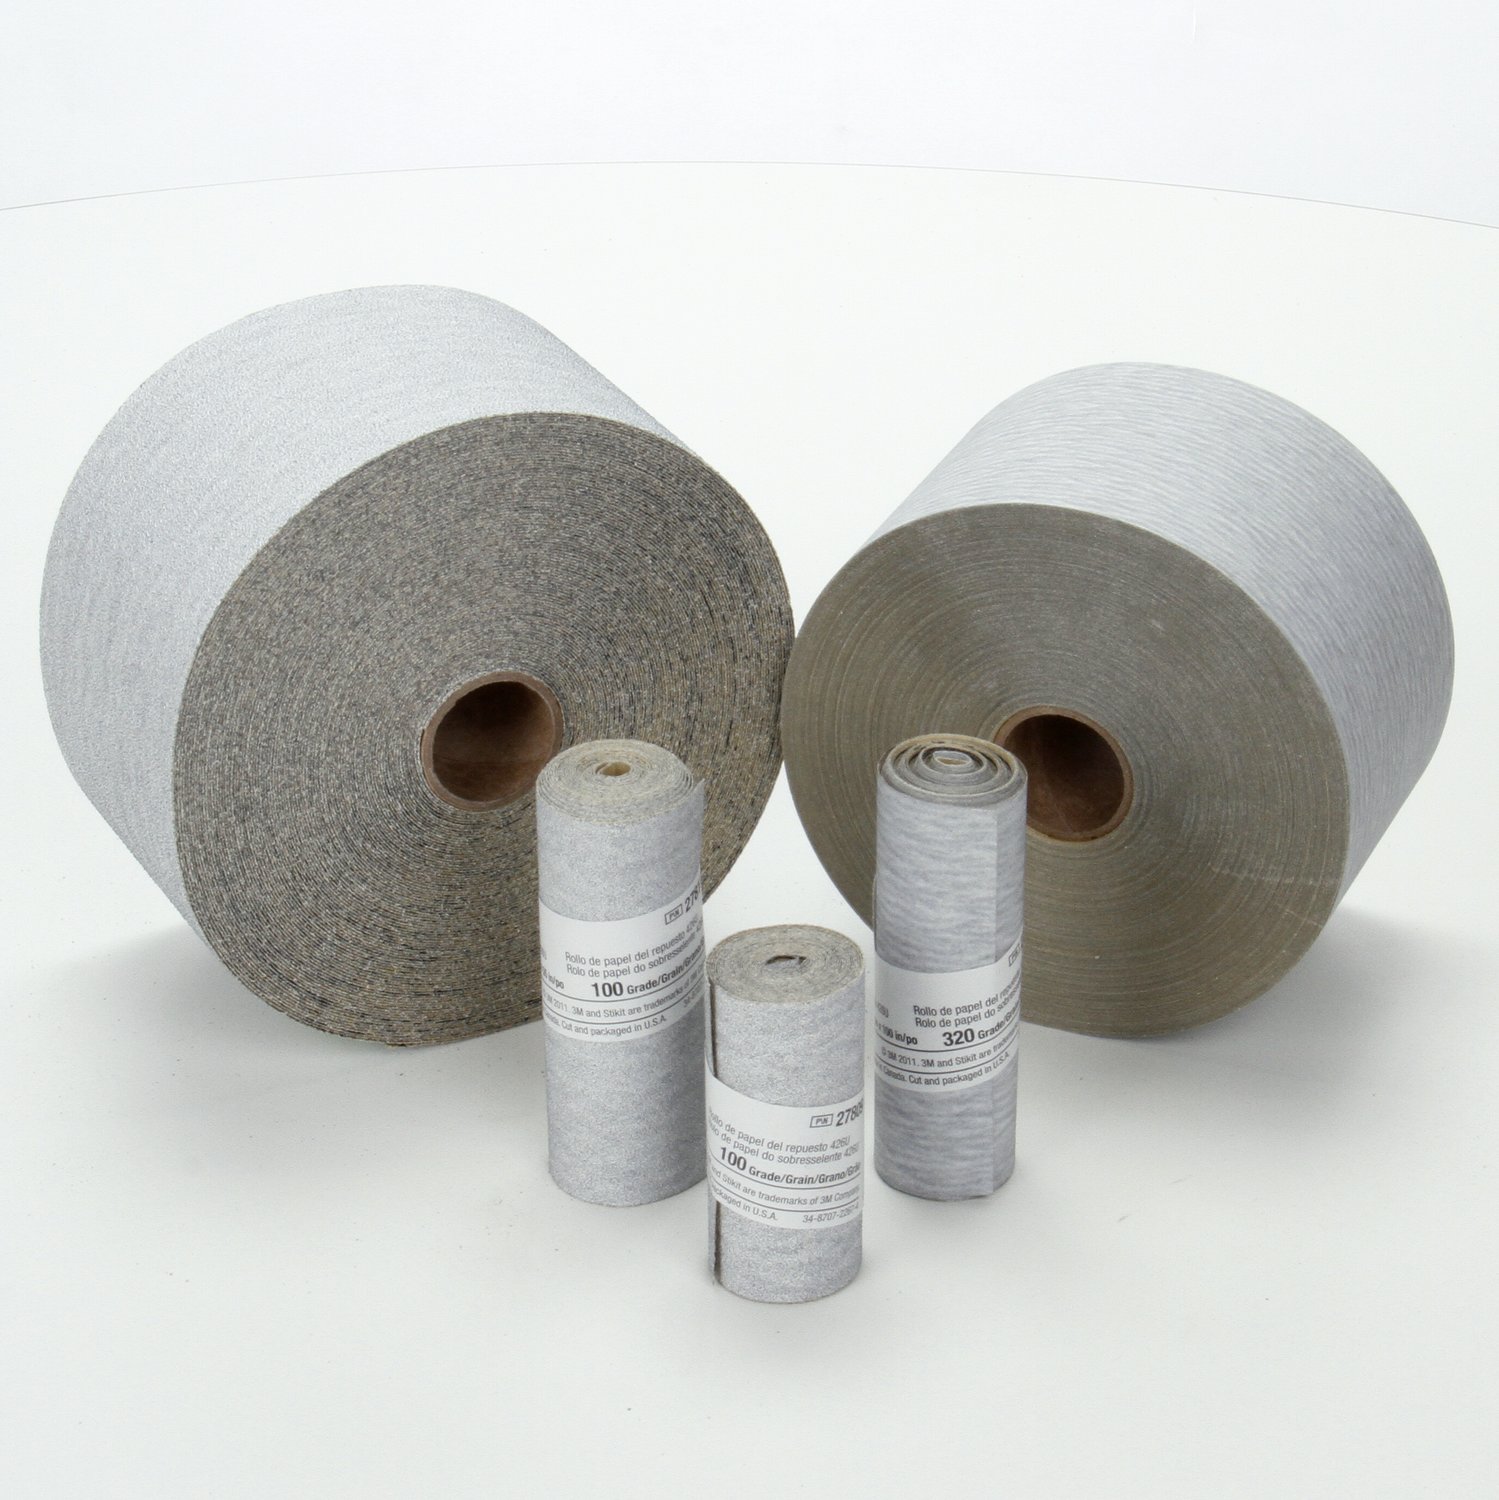 7100070168 - 3M Stikit Paper Roll 426U, 240 A-weight, Config